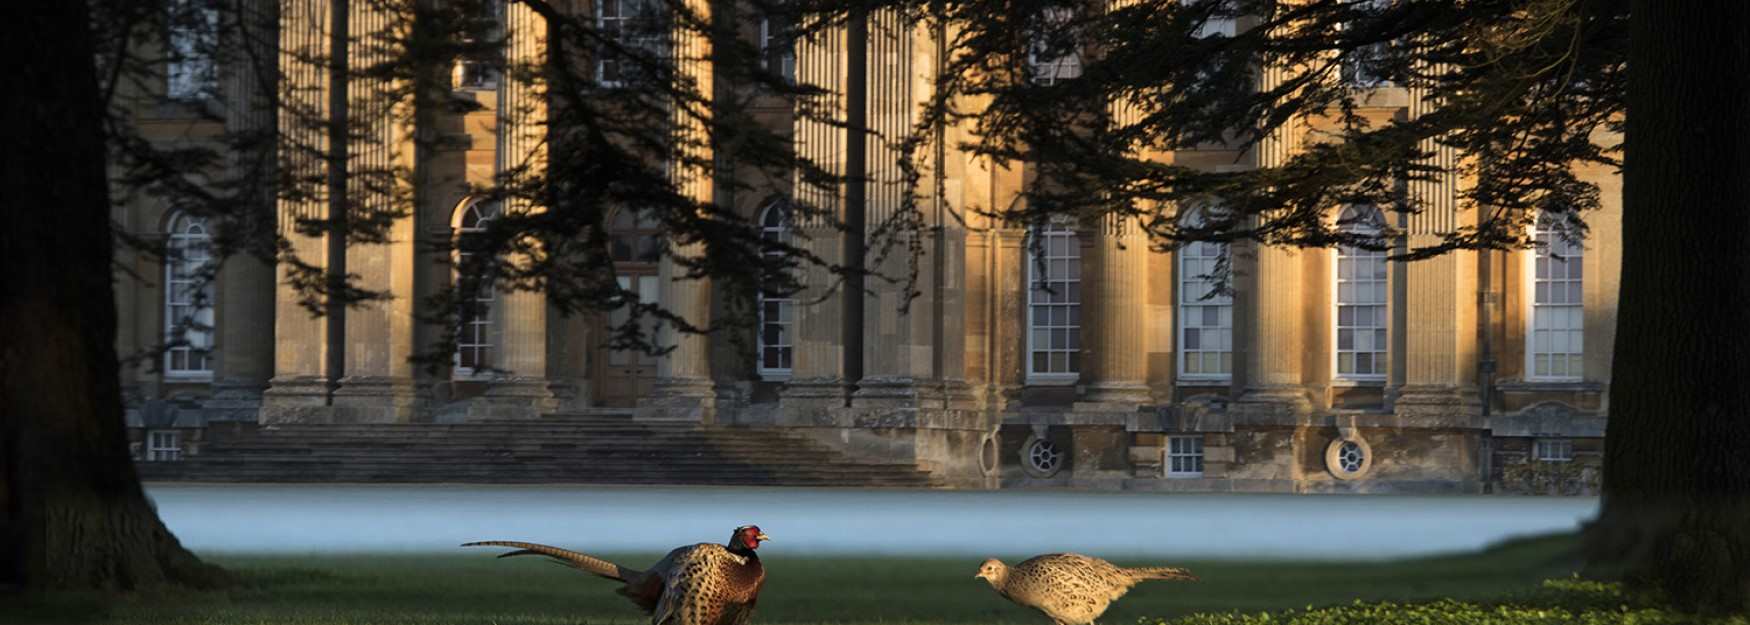 Pheasants in the mist at Blenheim Palace